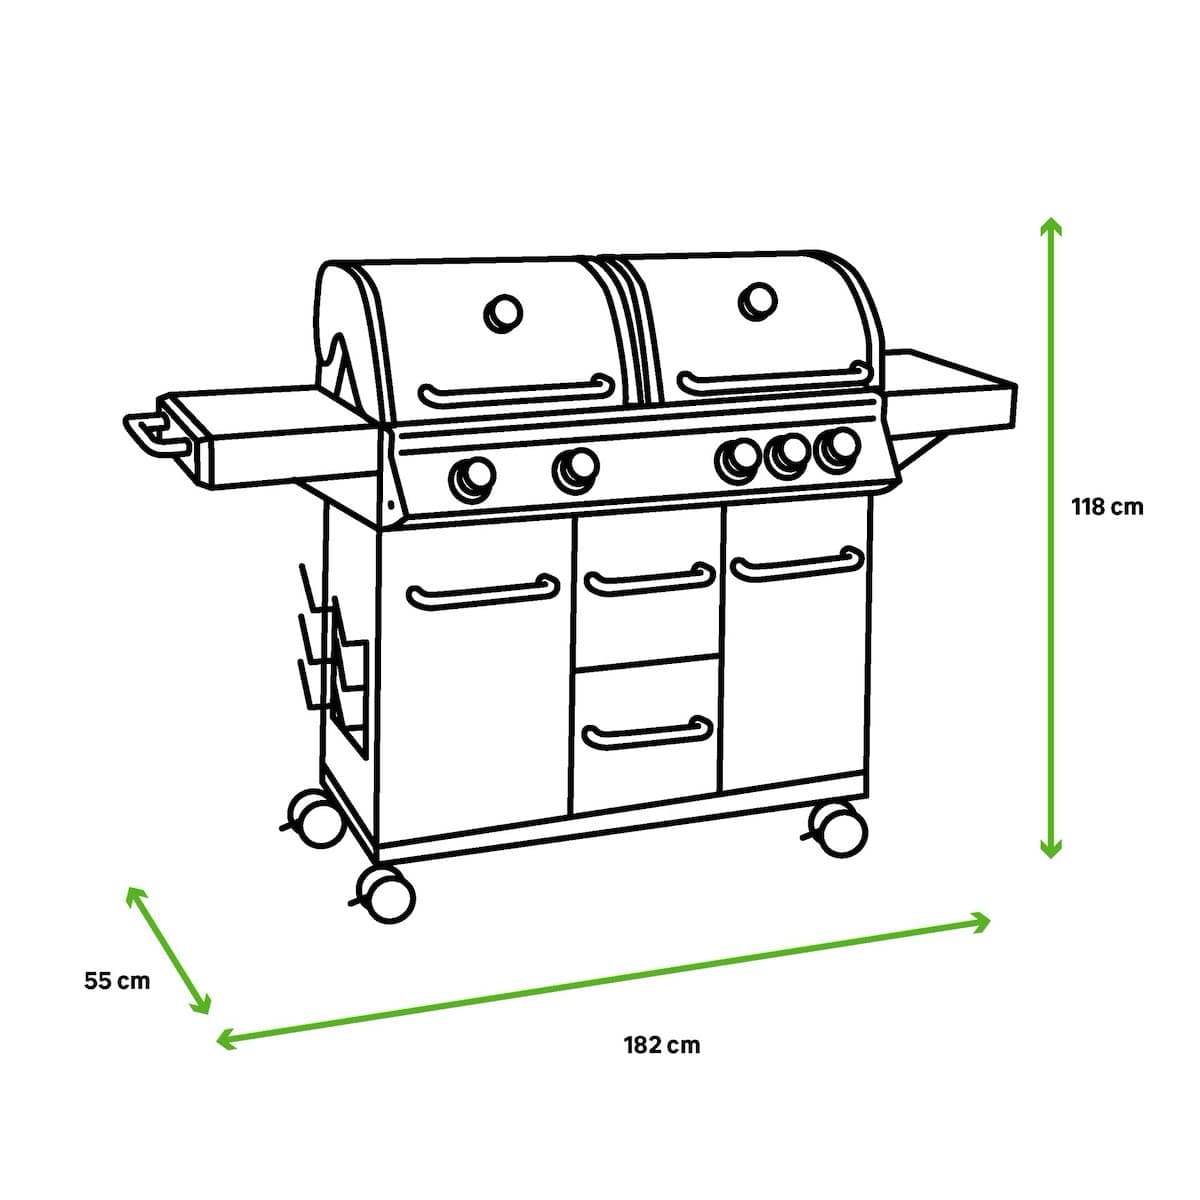 NATERIAL HUDSON 4-BURNER GAS BBQ - Premium Gas barbecues from Bricocenter - Just €1304.99! Shop now at Maltashopper.com